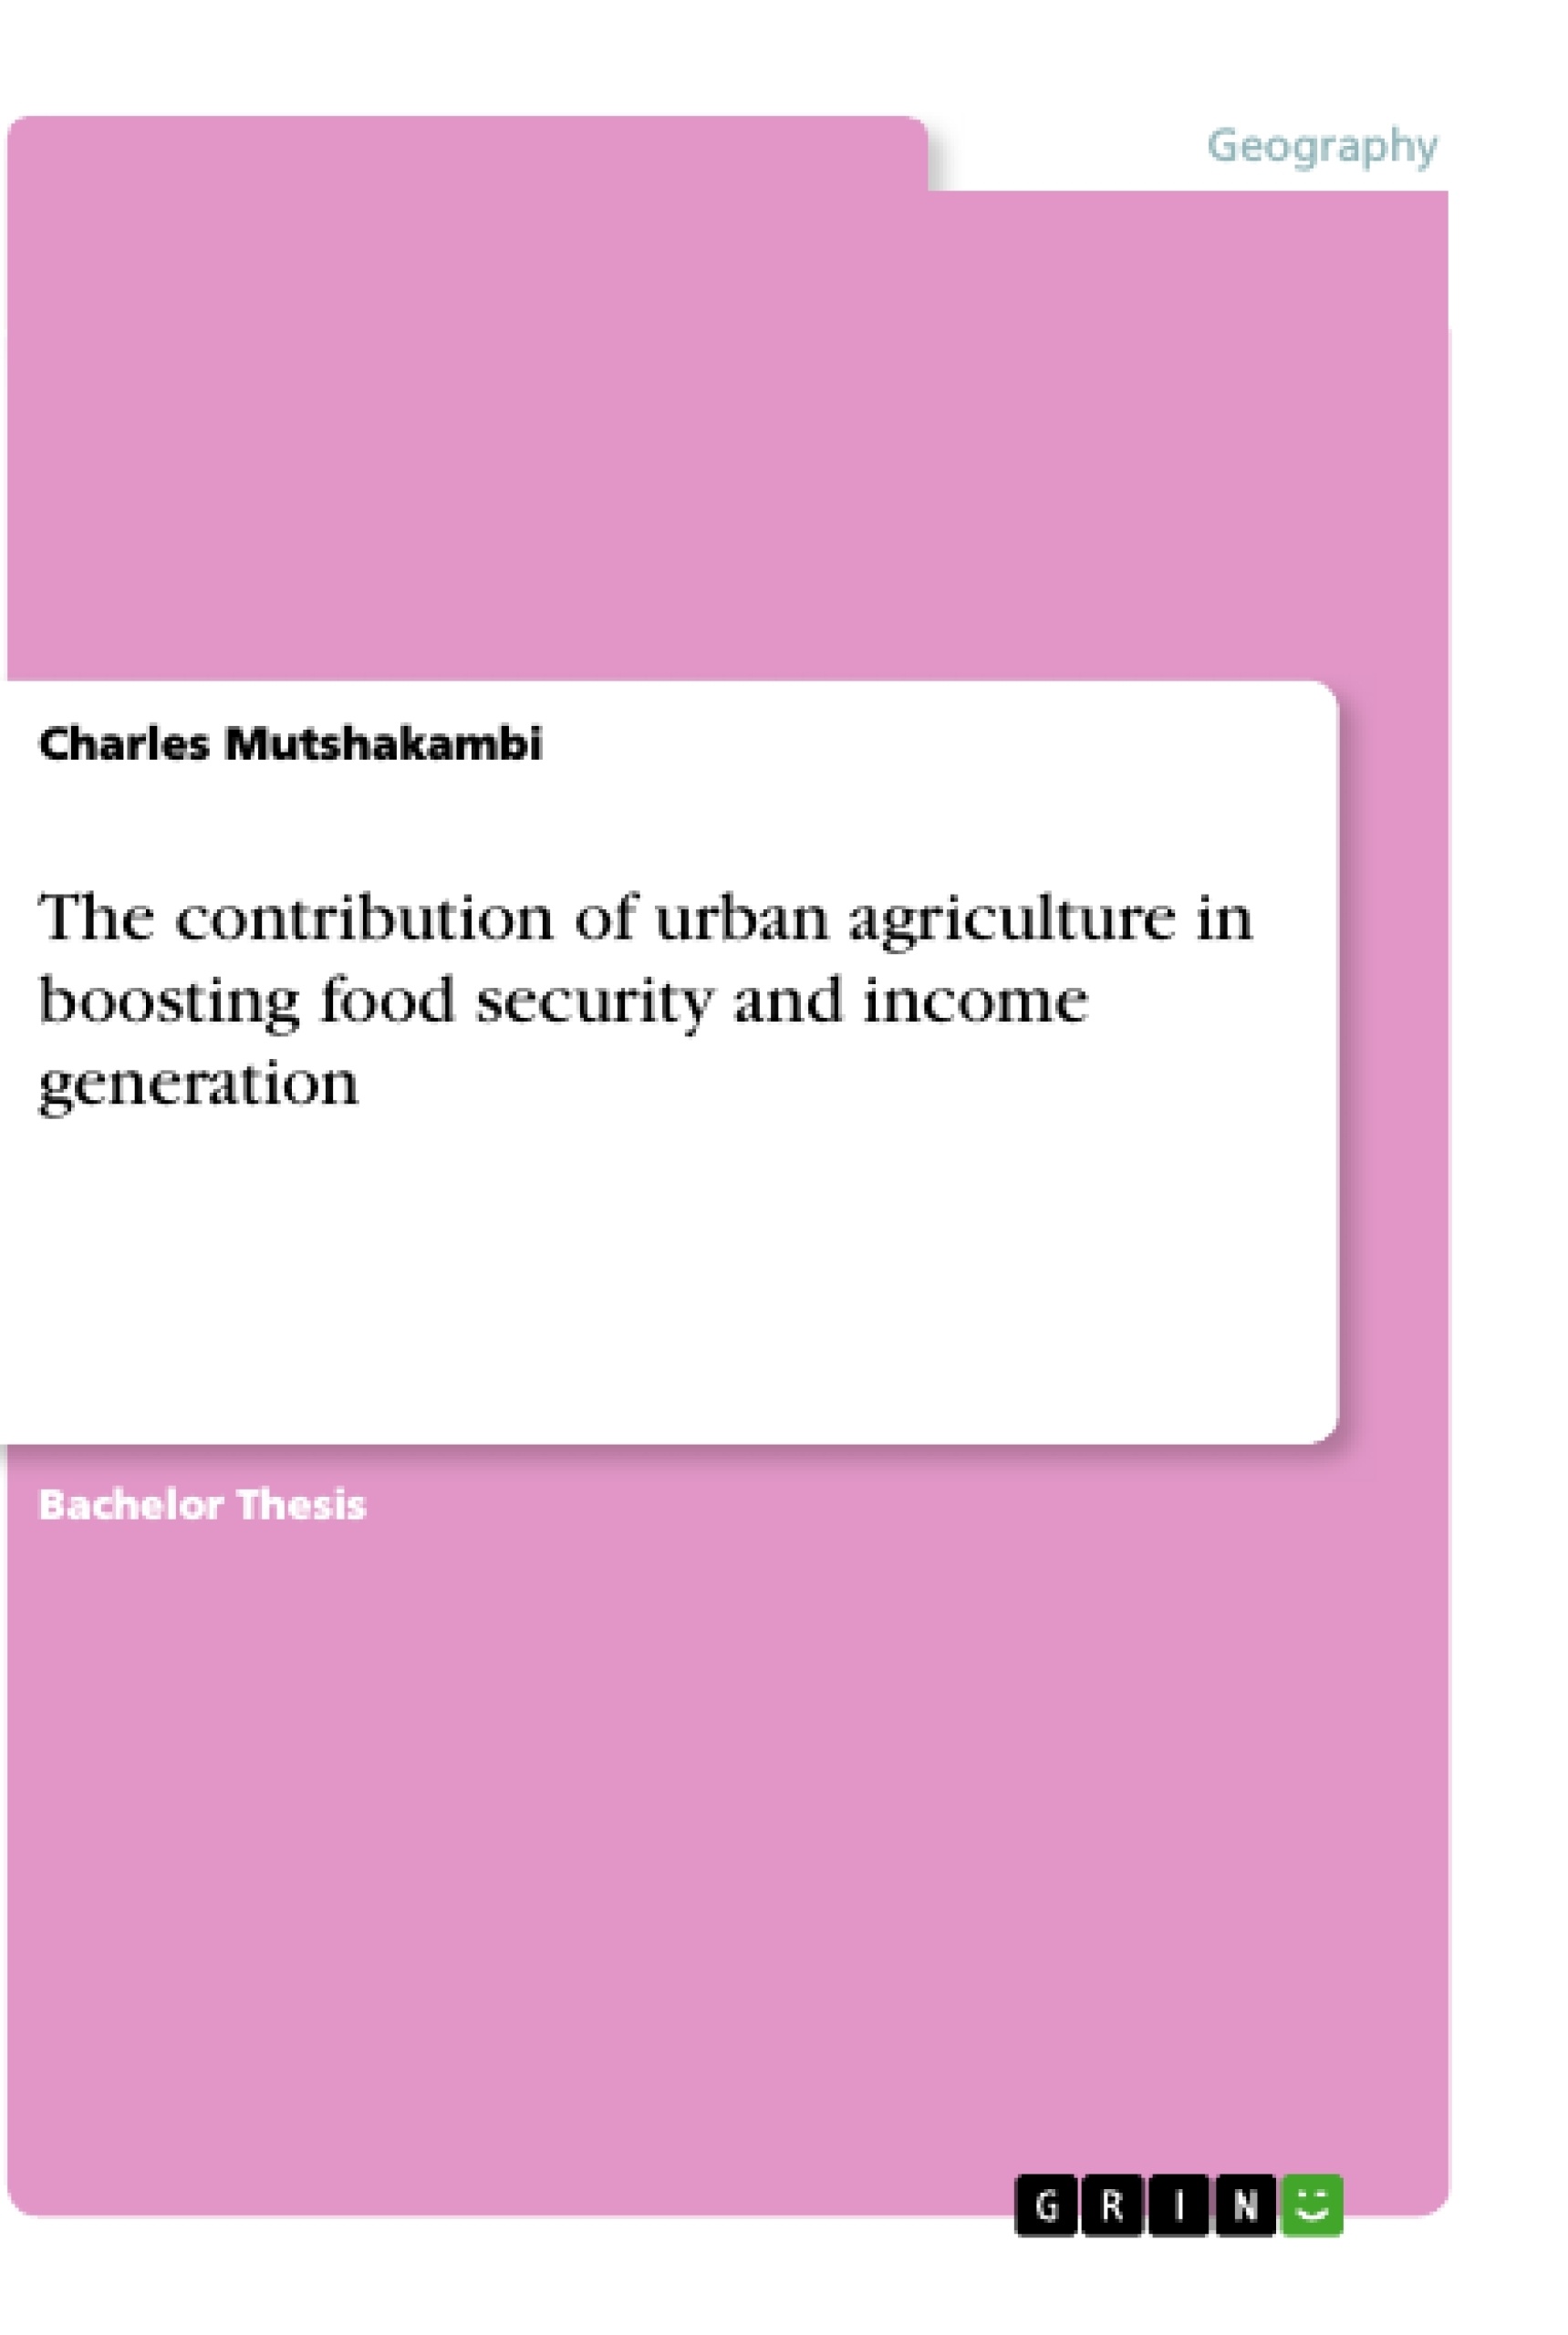 Title: The contribution of urban agriculture in boosting food security and income generation